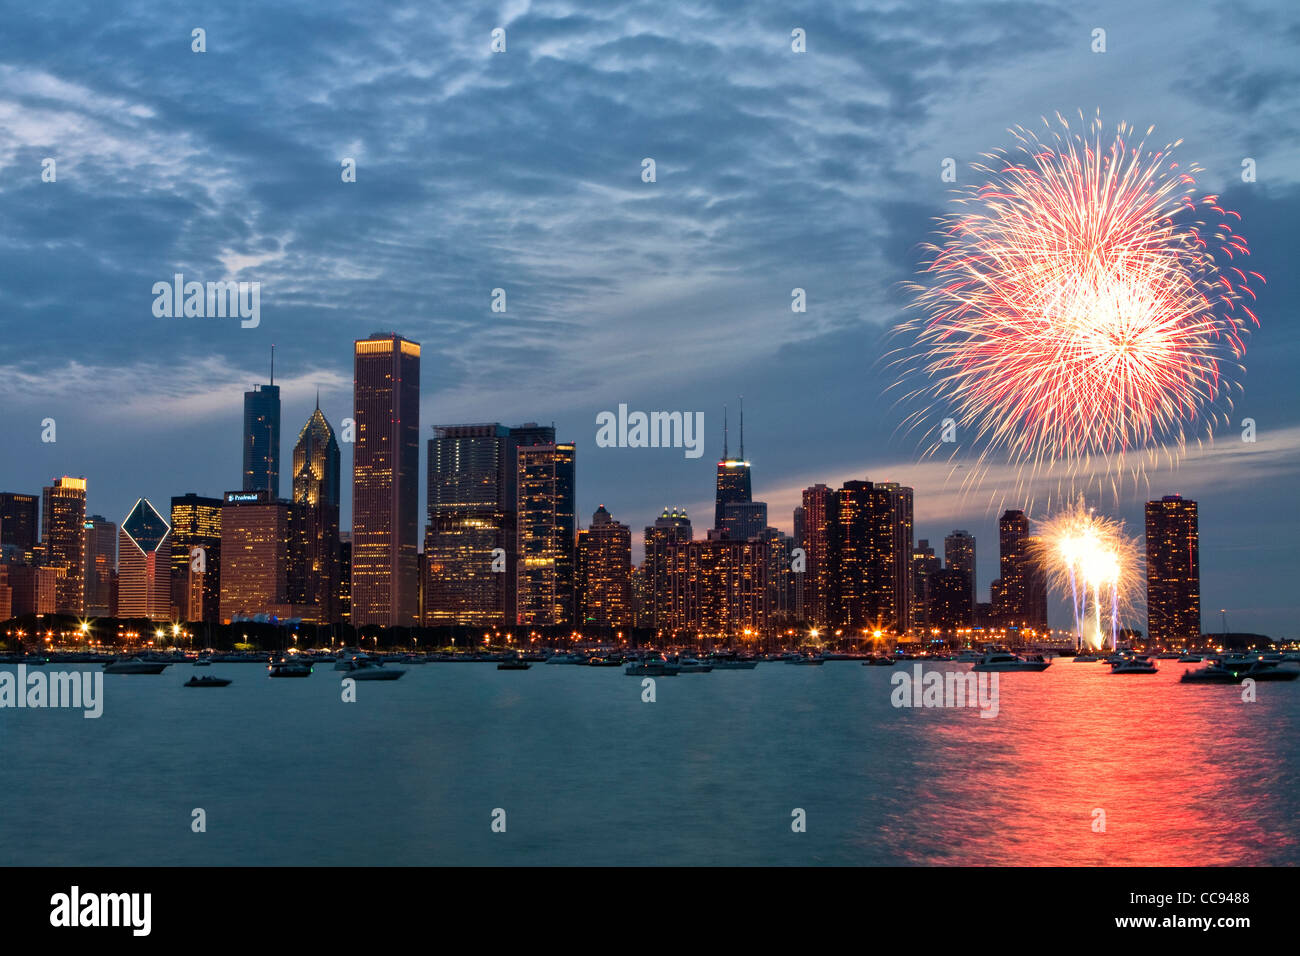 Independence Day fireworks by Chicago skyline over Lake Michigan. Stock Photo